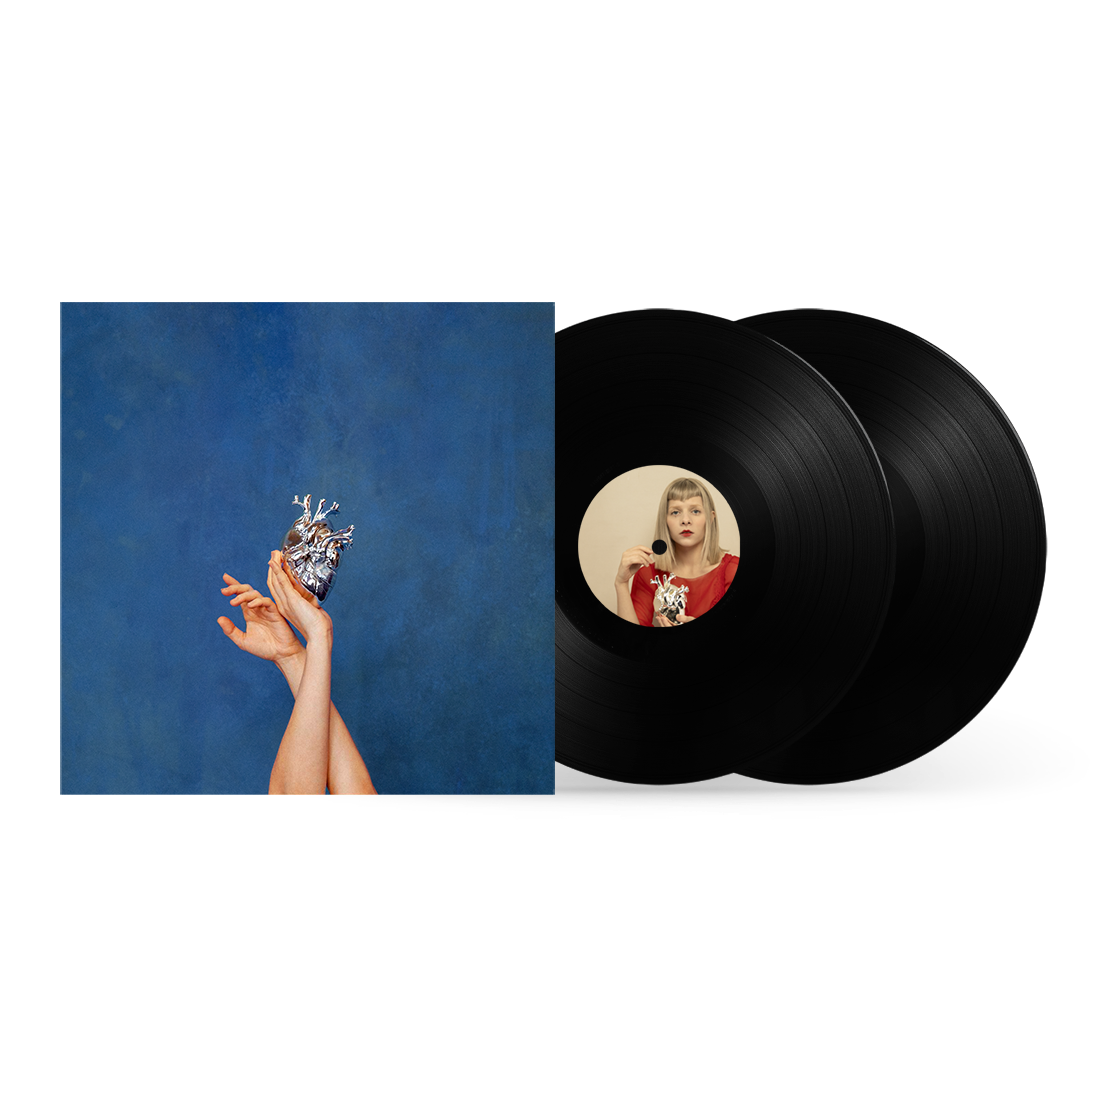 What Happened To The Heart? 2LP & Exclusive 2LP